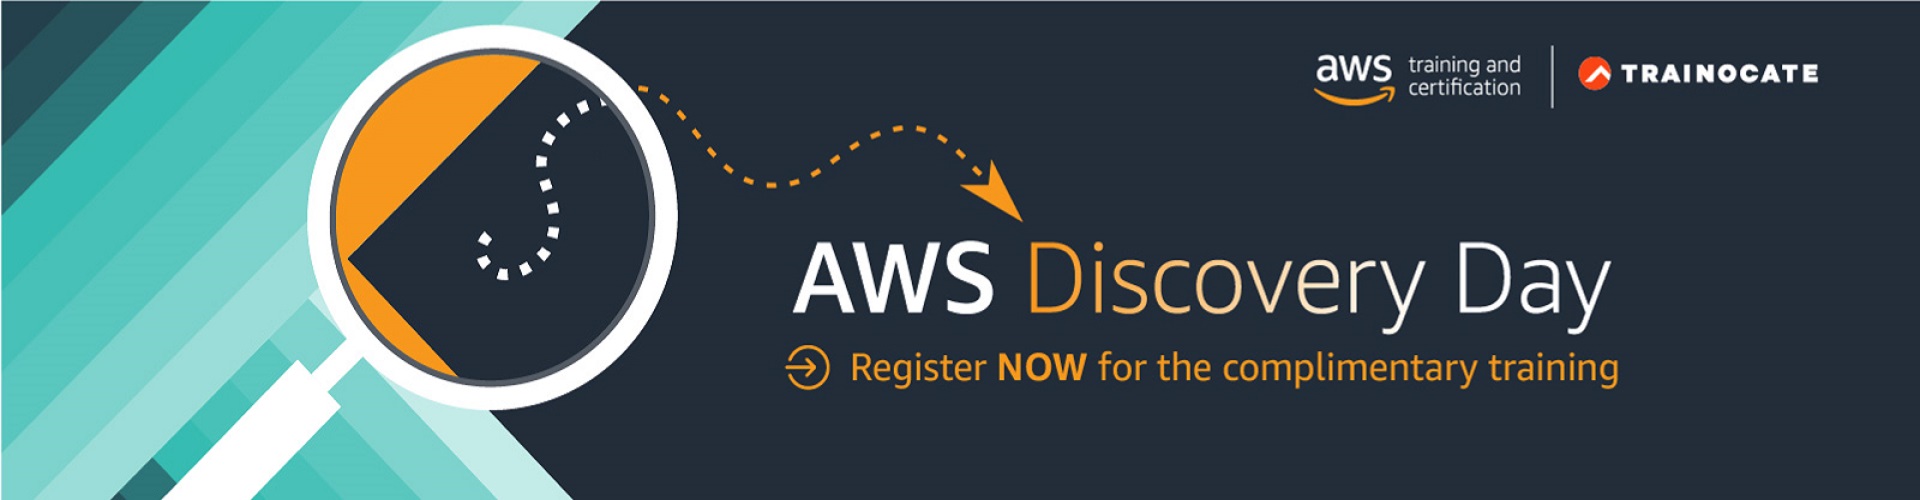 banner_aws-discovery-day1920